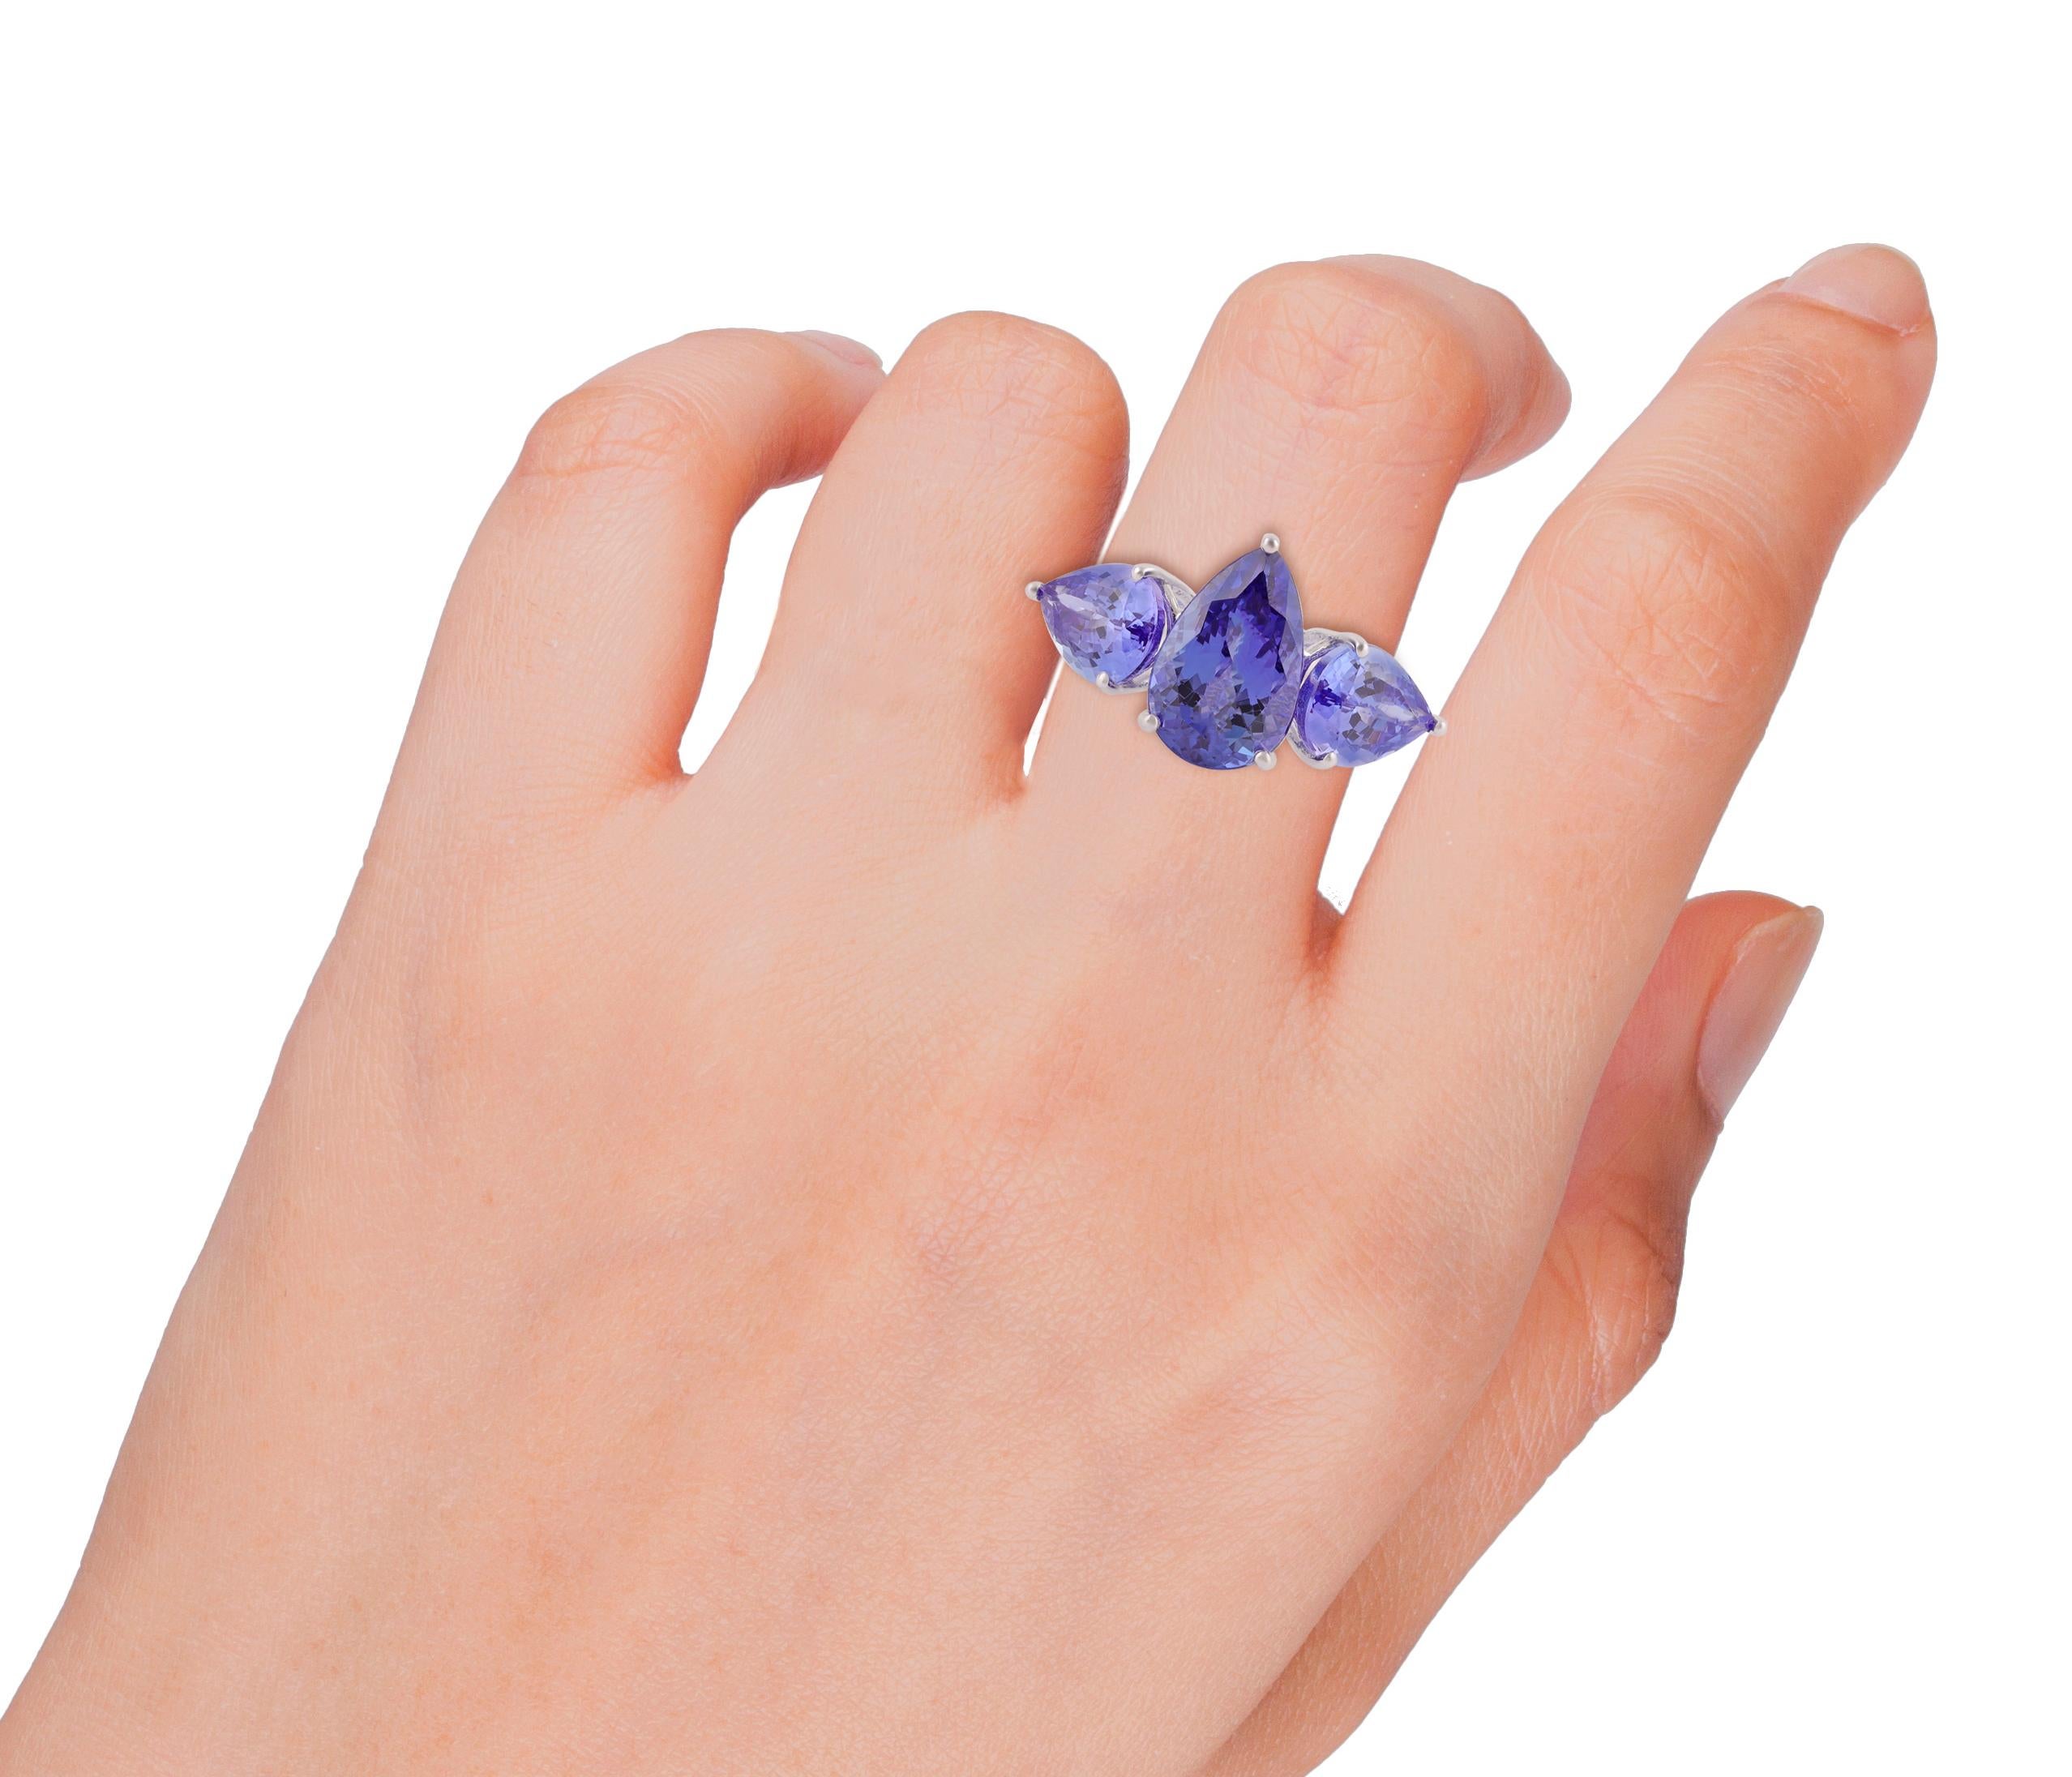  7.71 Carat Tanzanite Mix Shape Three-Stone Ring 18k White Gold In New Condition For Sale In Jaipur, Rajasthan